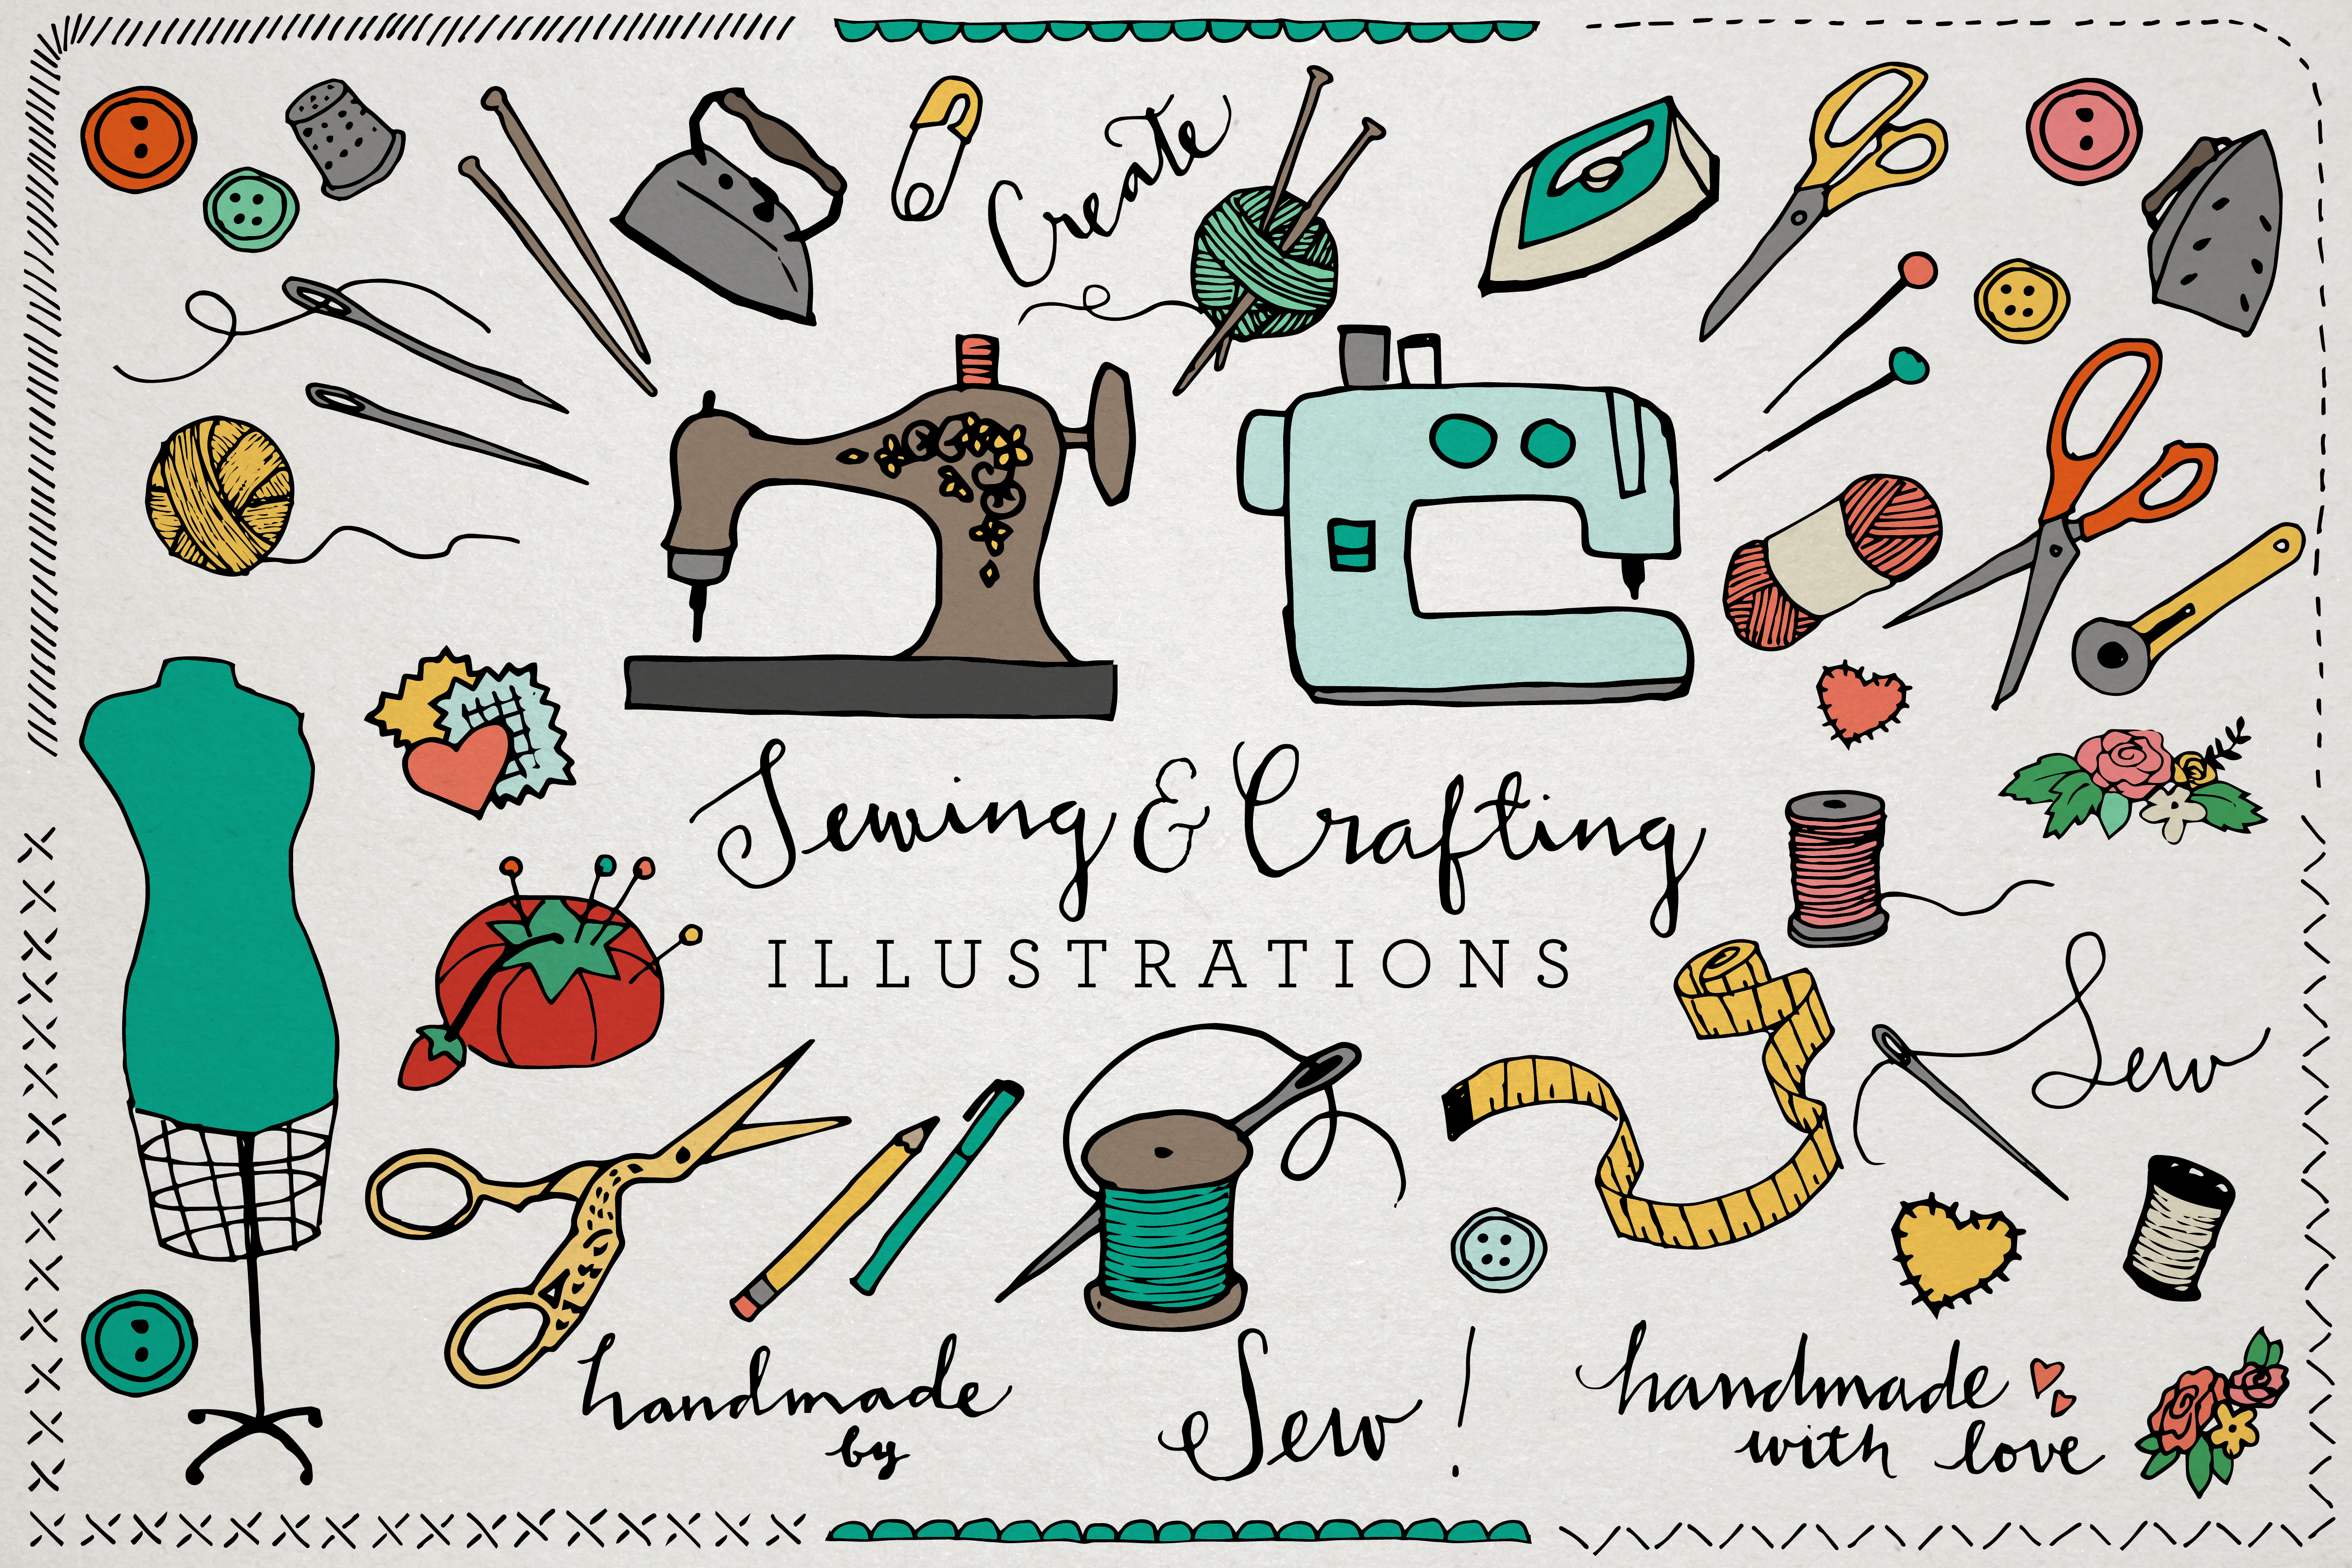 Illustrations for atelier with sewing machines, buttons, knitting needles, etc.